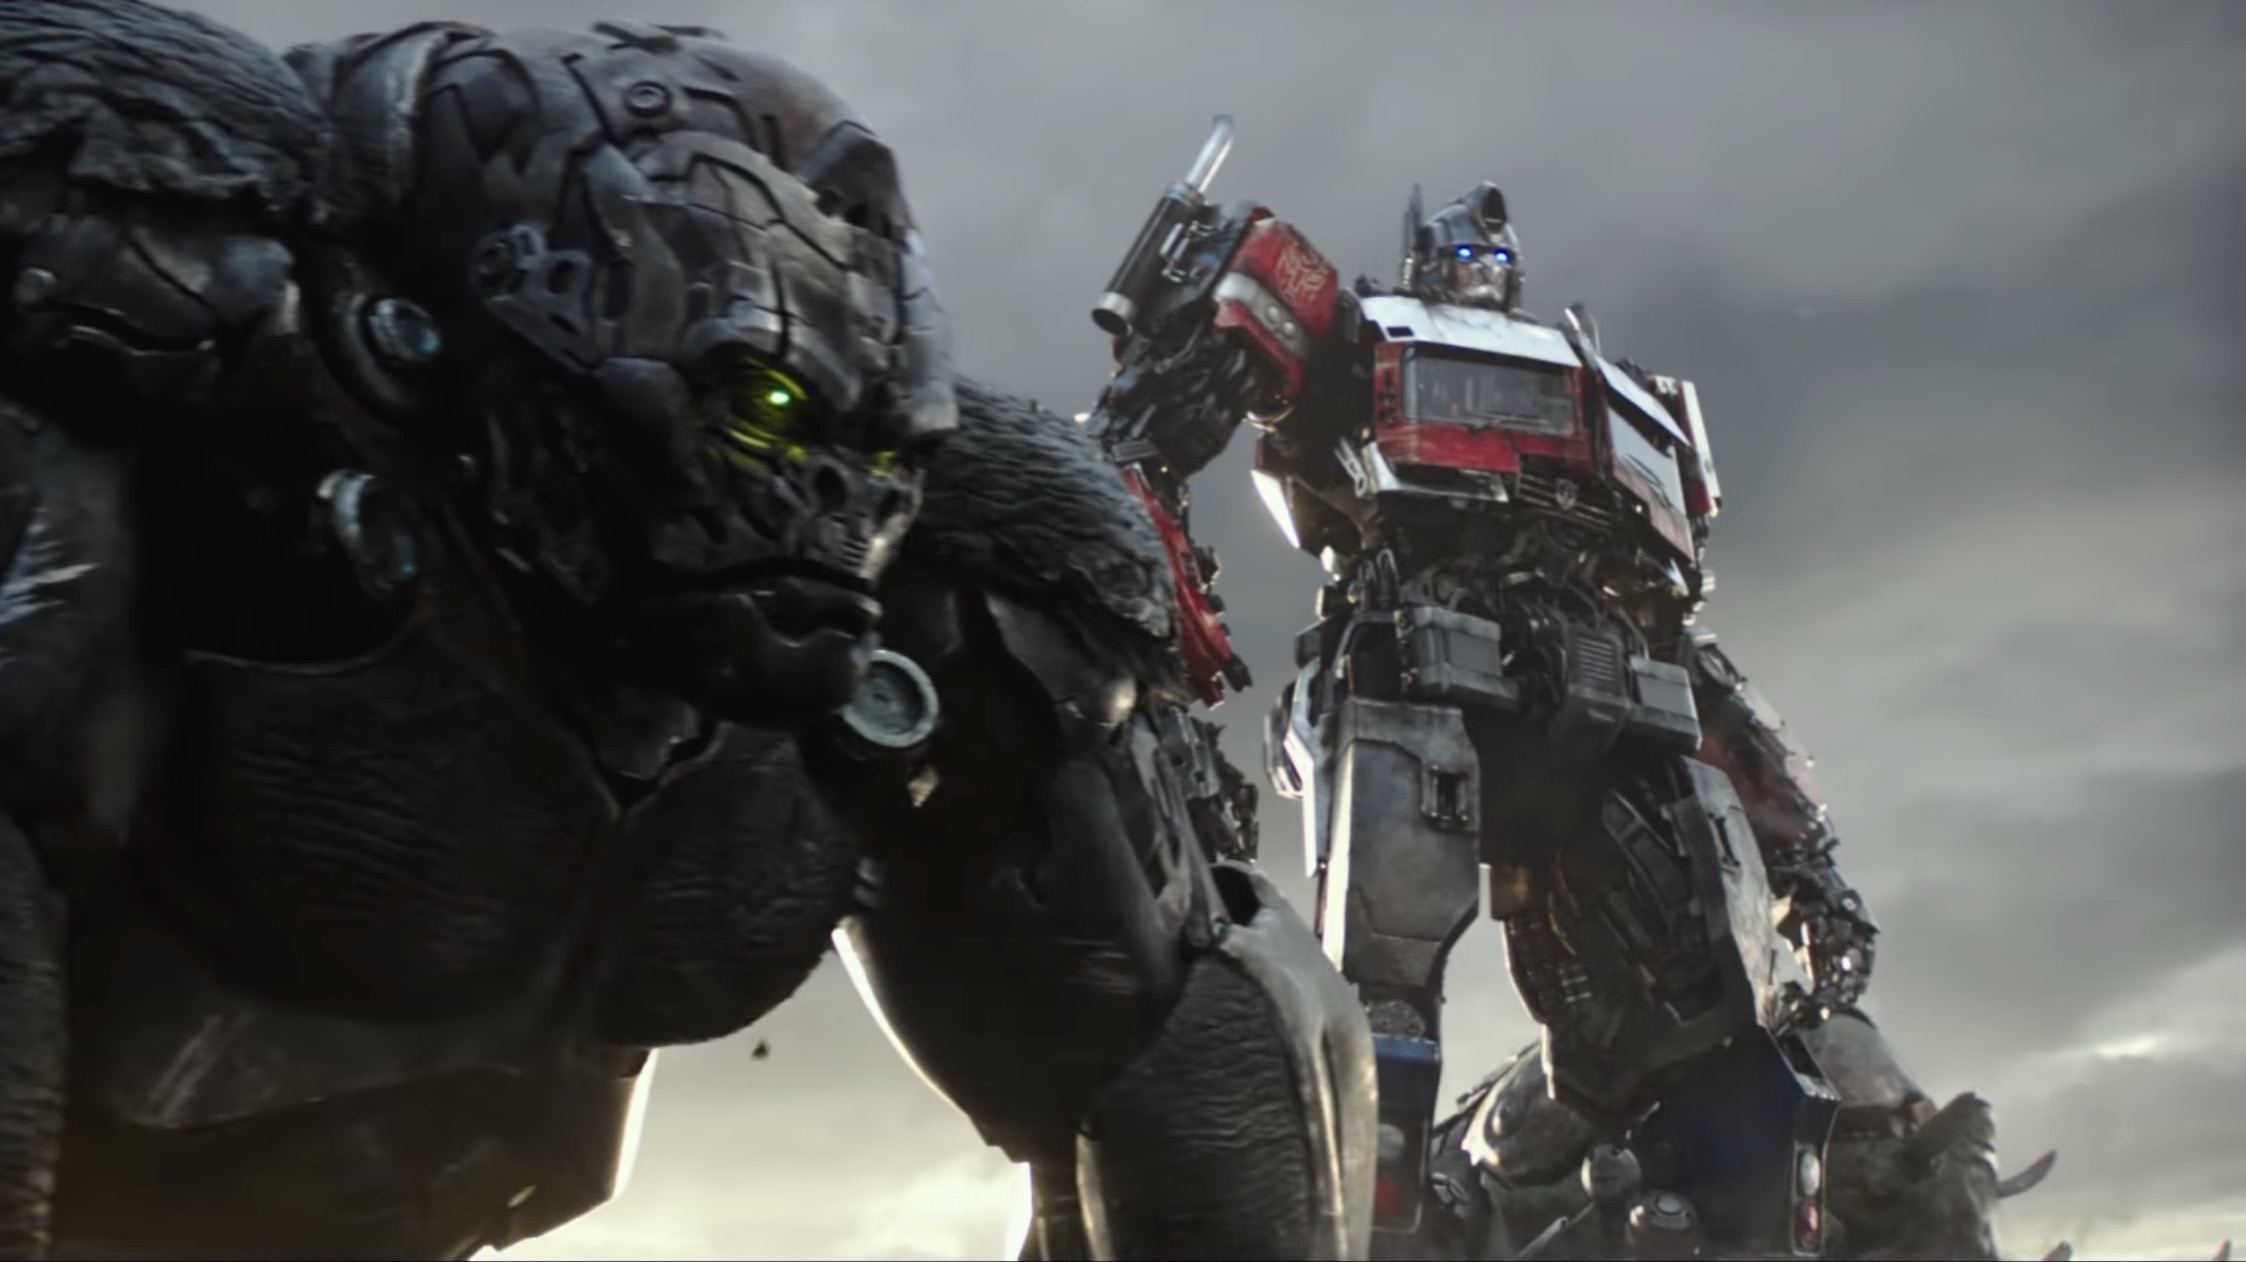 Why are Optimus prime and bumblebee the only autobots in every movie? : r/ transformers